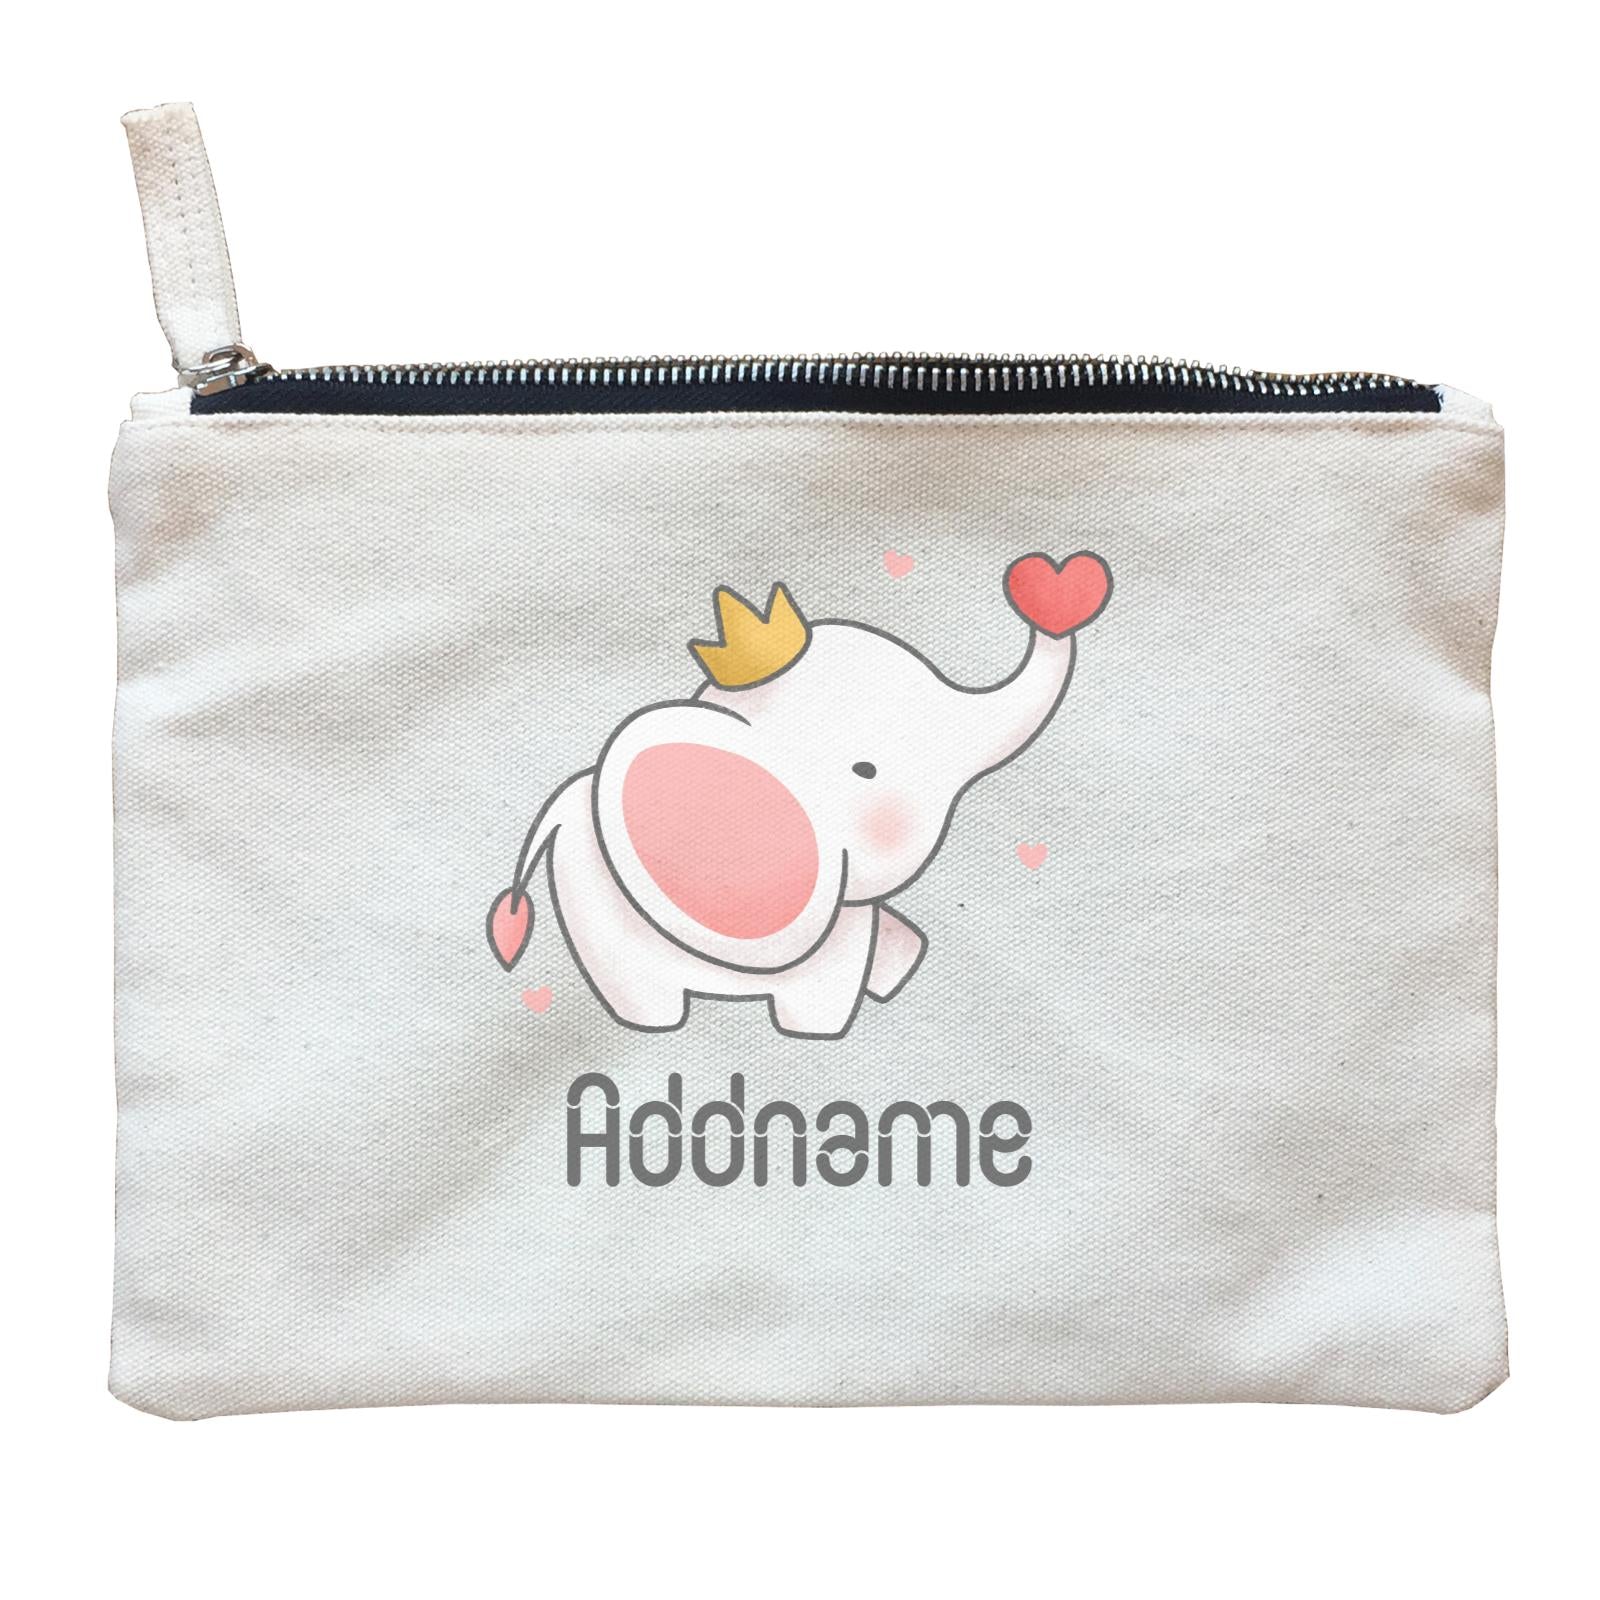 Cute Hand Drawn Style Baby Elephant with Heart and Crown Addname Zipper Pouch